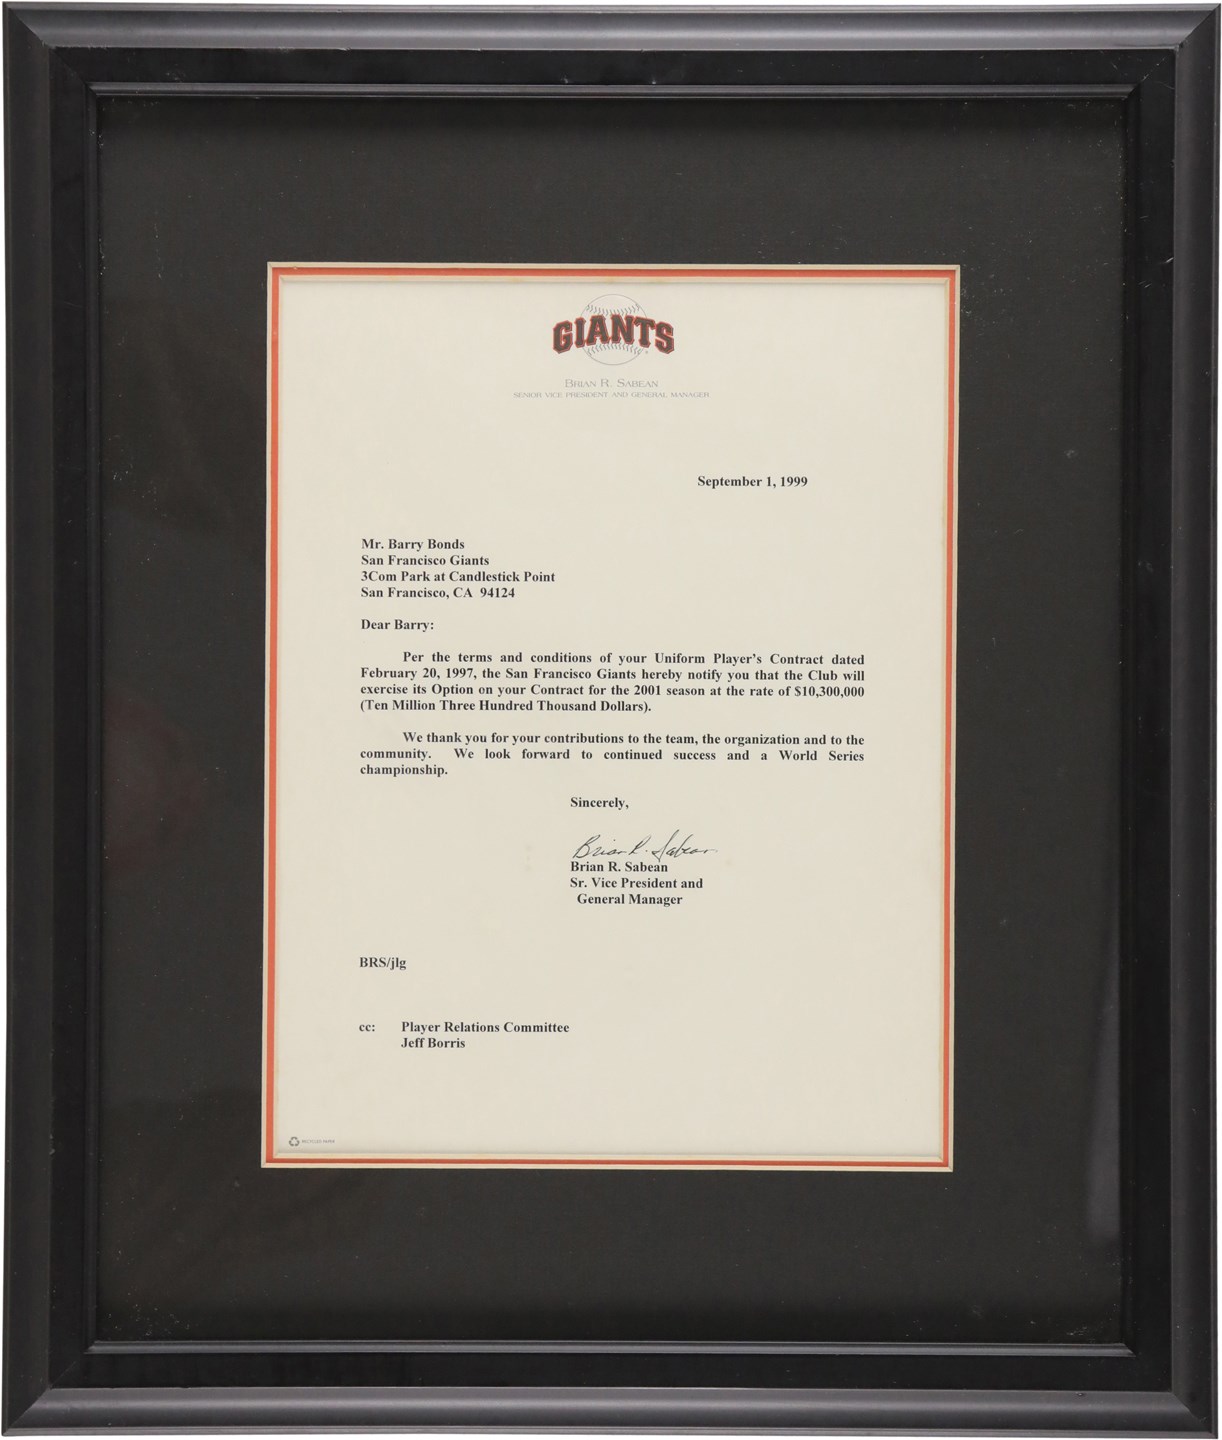 Baseball Autographs - Amazing Barry Bonds Historic 2001 Contract Letter Picking Up Club Option